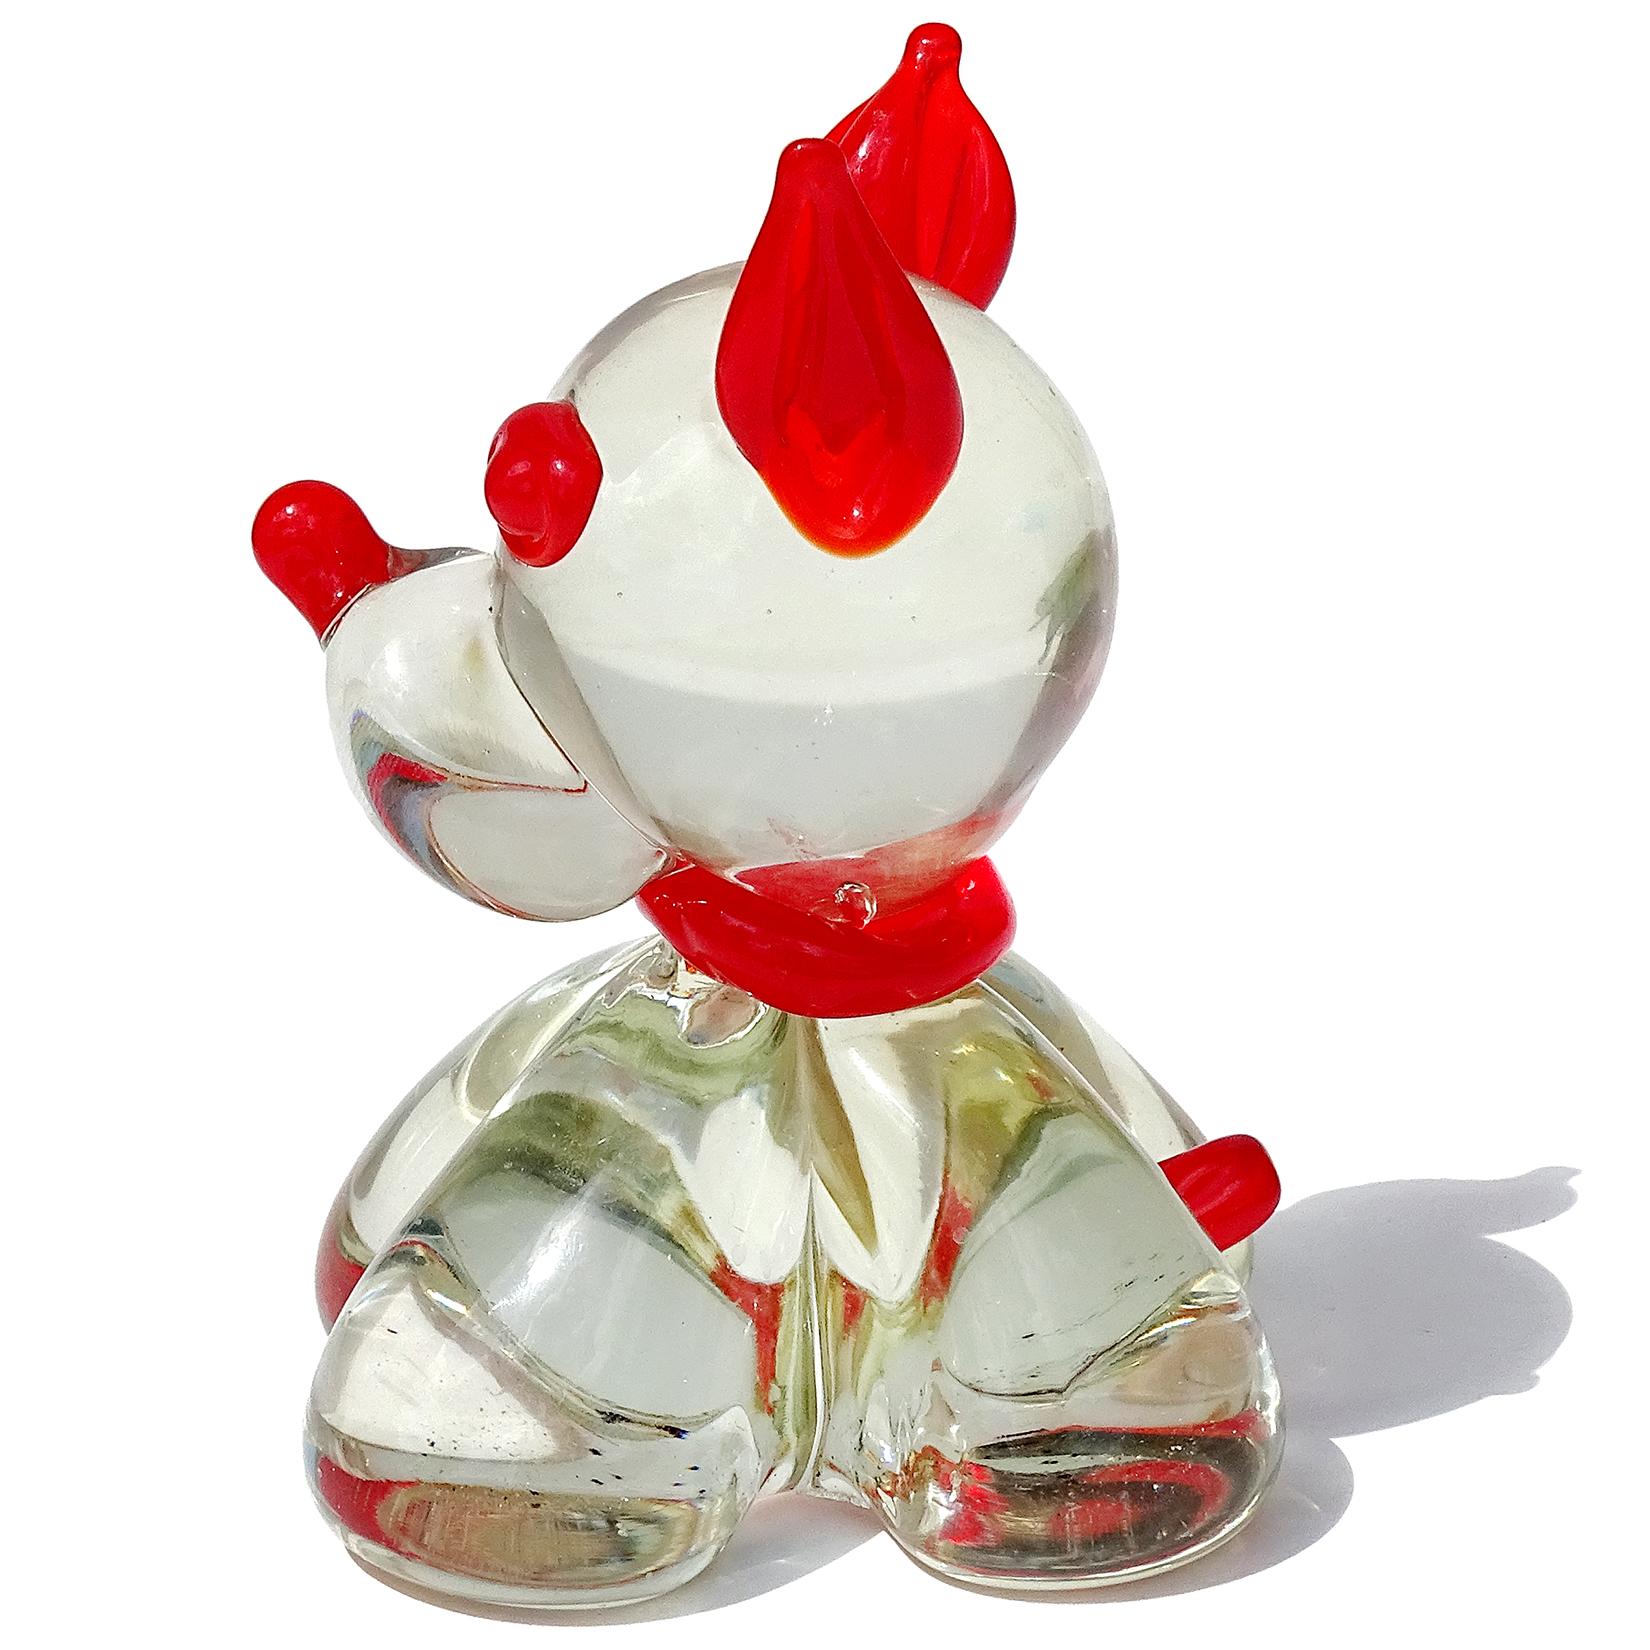 Cute vintage Murano hand blown red and clear Italian art glass puppy dog sculpture / paperweight. Documented to the Fratelli Toso company. It still retains its original 